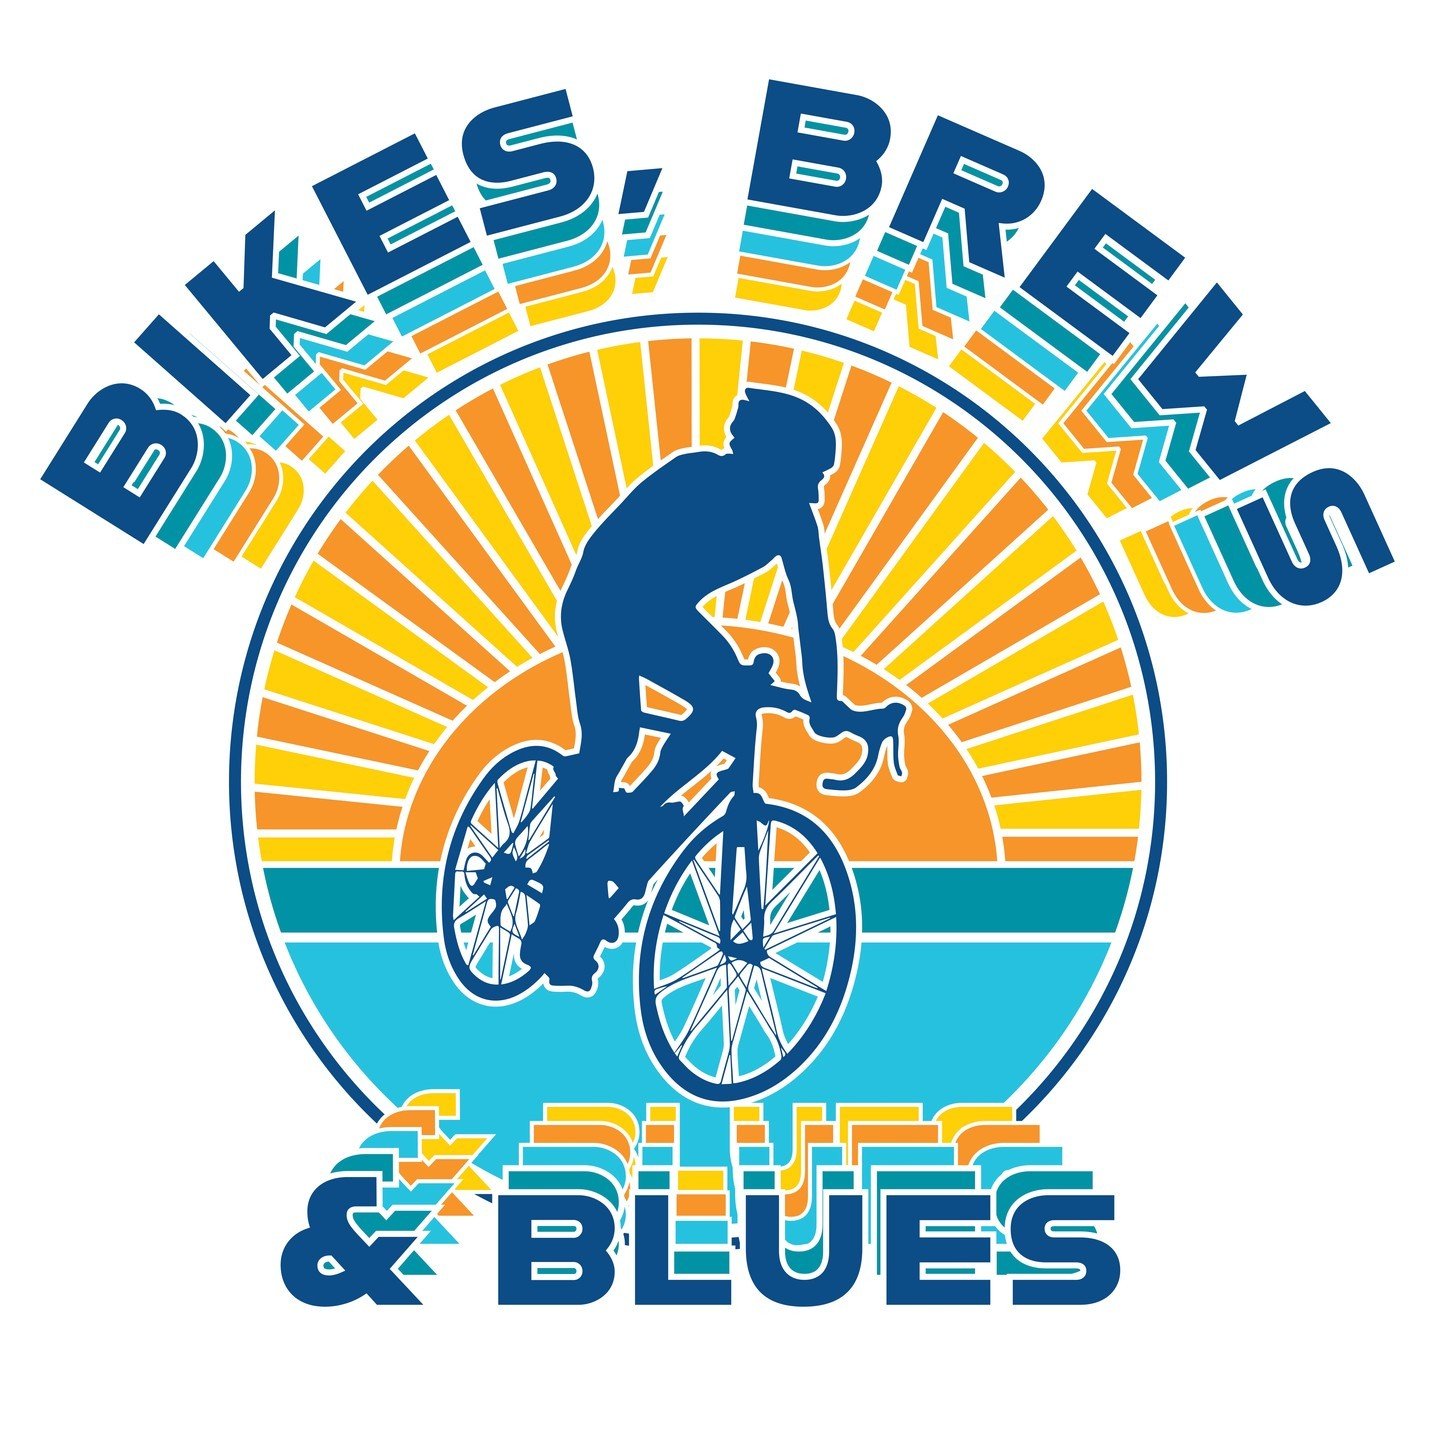 Join us for our first ever Bikes, Brews &amp; Blues Event Saturday, June 29🚲 🍻 🎶 

Grab your bike &amp; friends and embark on a two-wheeled adventure! Choose from one of our three diverse routes or conquer them all! End your adventure on our patio